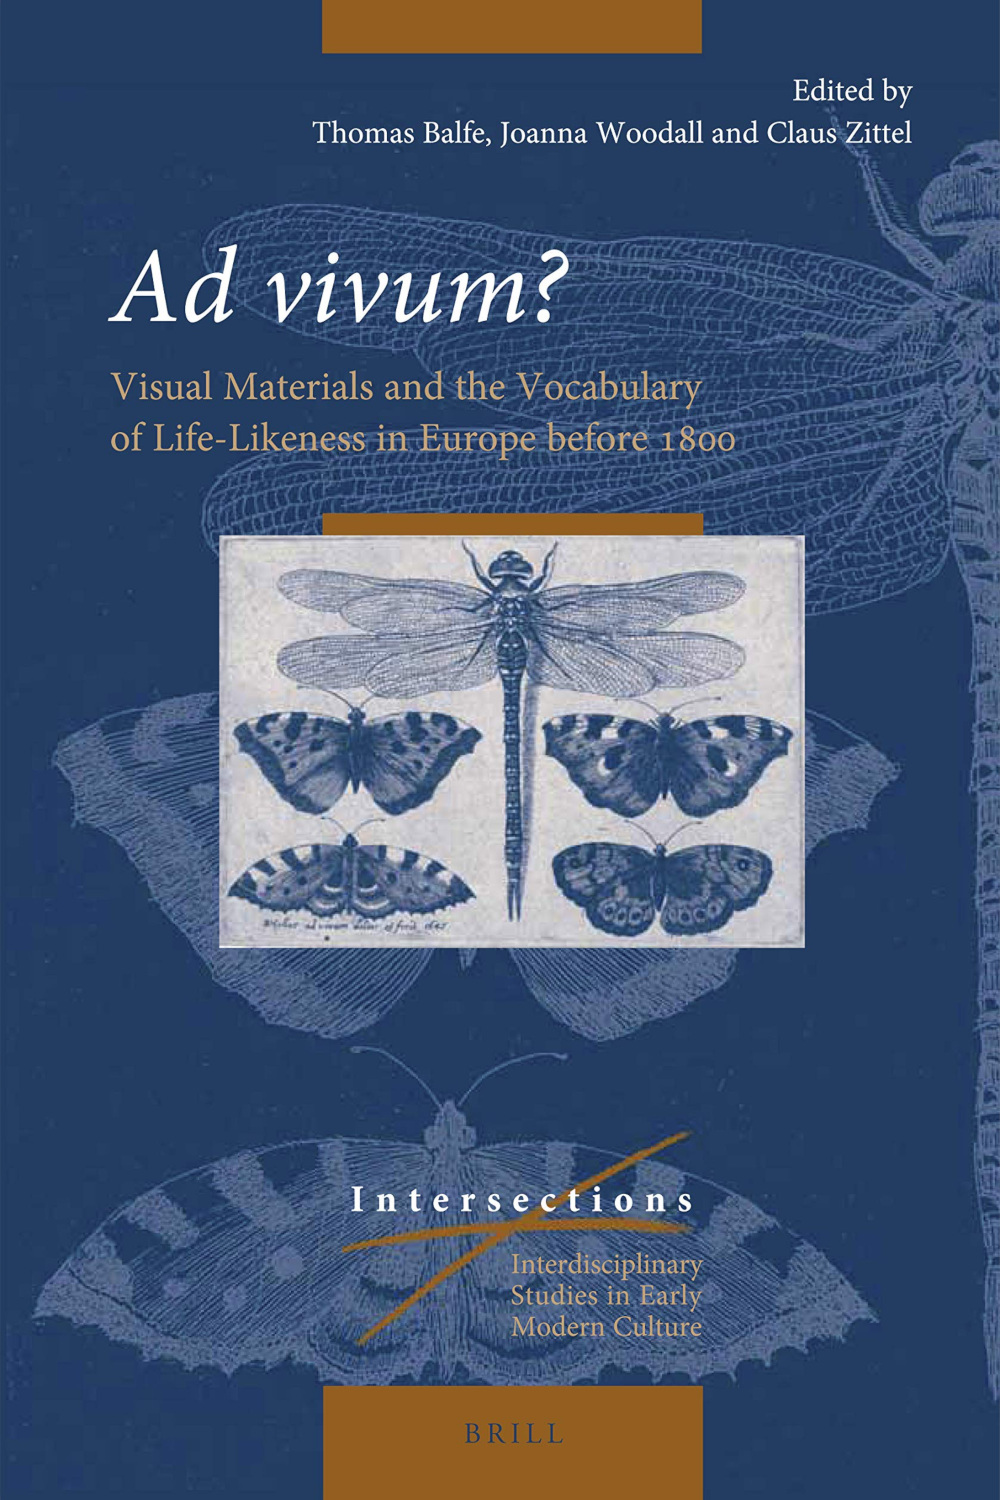 Ad vivum? Visual Materials and the Vocabulary of Life-Likeness in Europe before 1800